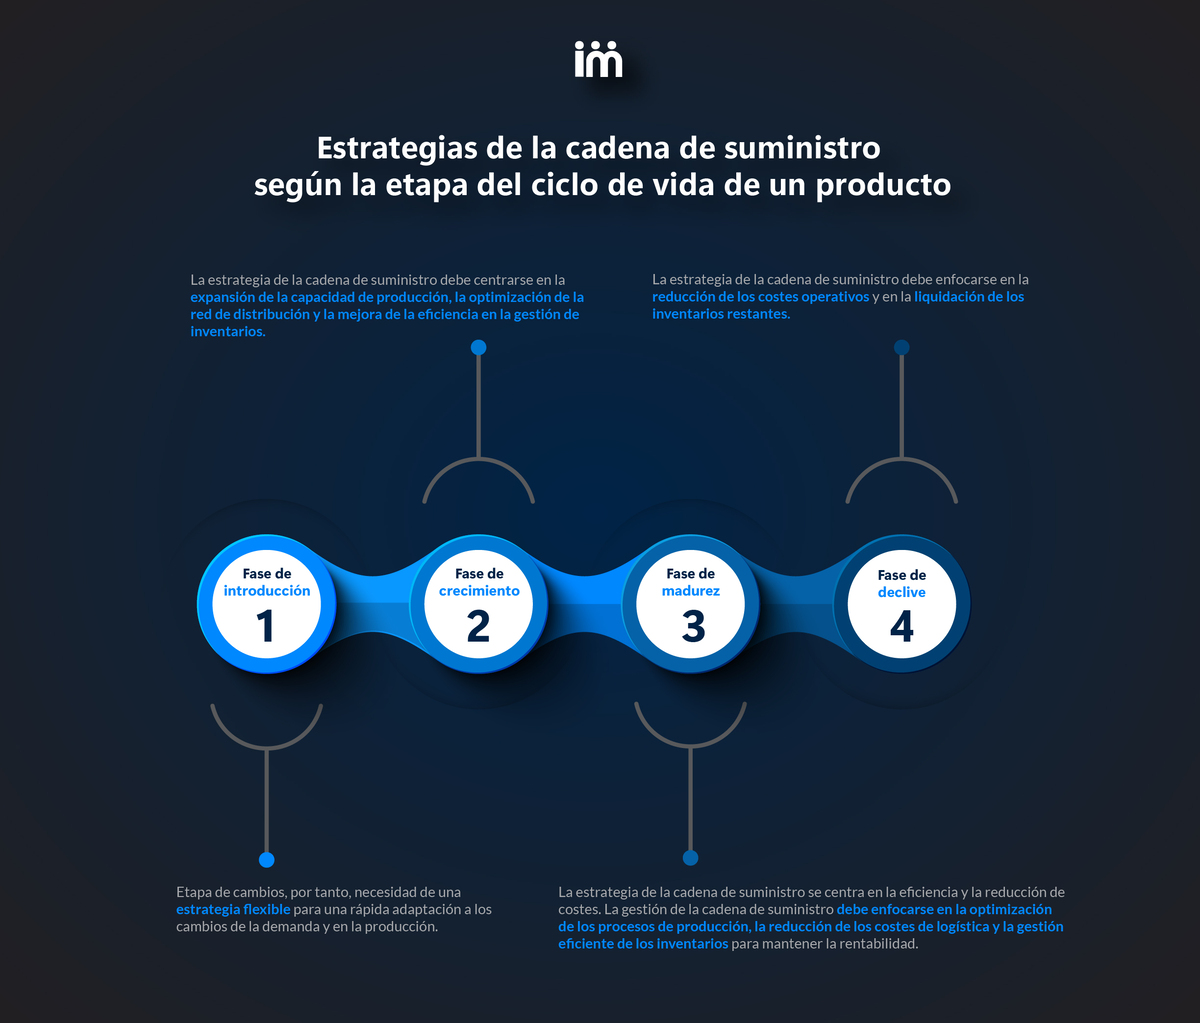 Infographic by Imperia: Product Life Cycle